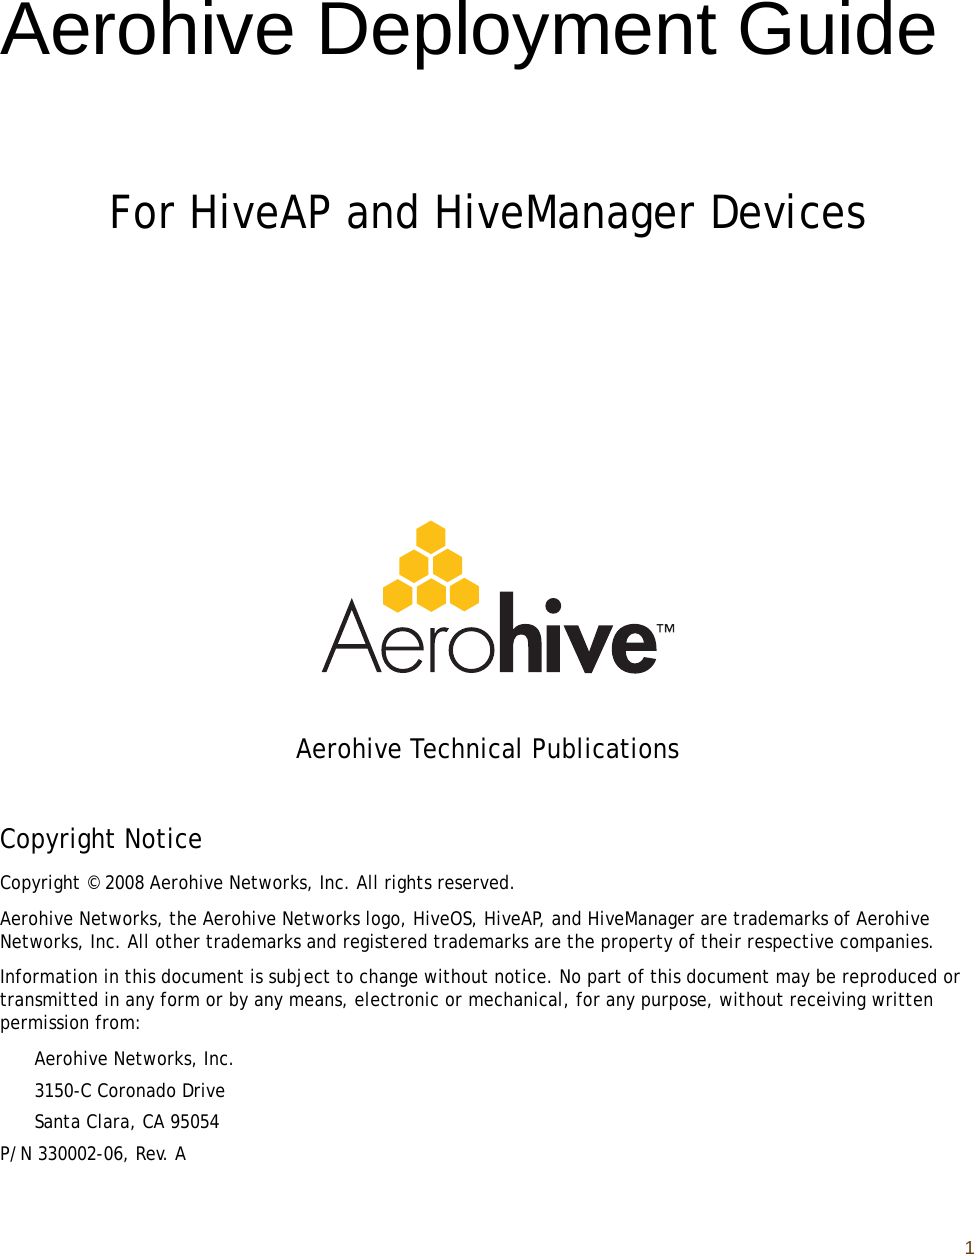 1Aerohive Deployment GuideFor HiveAP and HiveManager DevicesAerohive Technical PublicationsCopyright NoticeCopyright © 2008 Aerohive Networks, Inc. All rights reserved.Aerohive Networks, the Aerohive Networks logo, HiveOS, HiveAP, and HiveManager are trademarks of Aerohive Networks, Inc. All other trademarks and registered trademarks are the property of their respective companies.Information in this document is subject to change without notice. No part of this document may be reproduced or transmitted in any form or by any means, electronic or mechanical, for any purpose, without receiving written permission from:Aerohive Networks, Inc.3150-C Coronado DriveSanta Clara, CA 95054P/N 330002-06, Rev. A